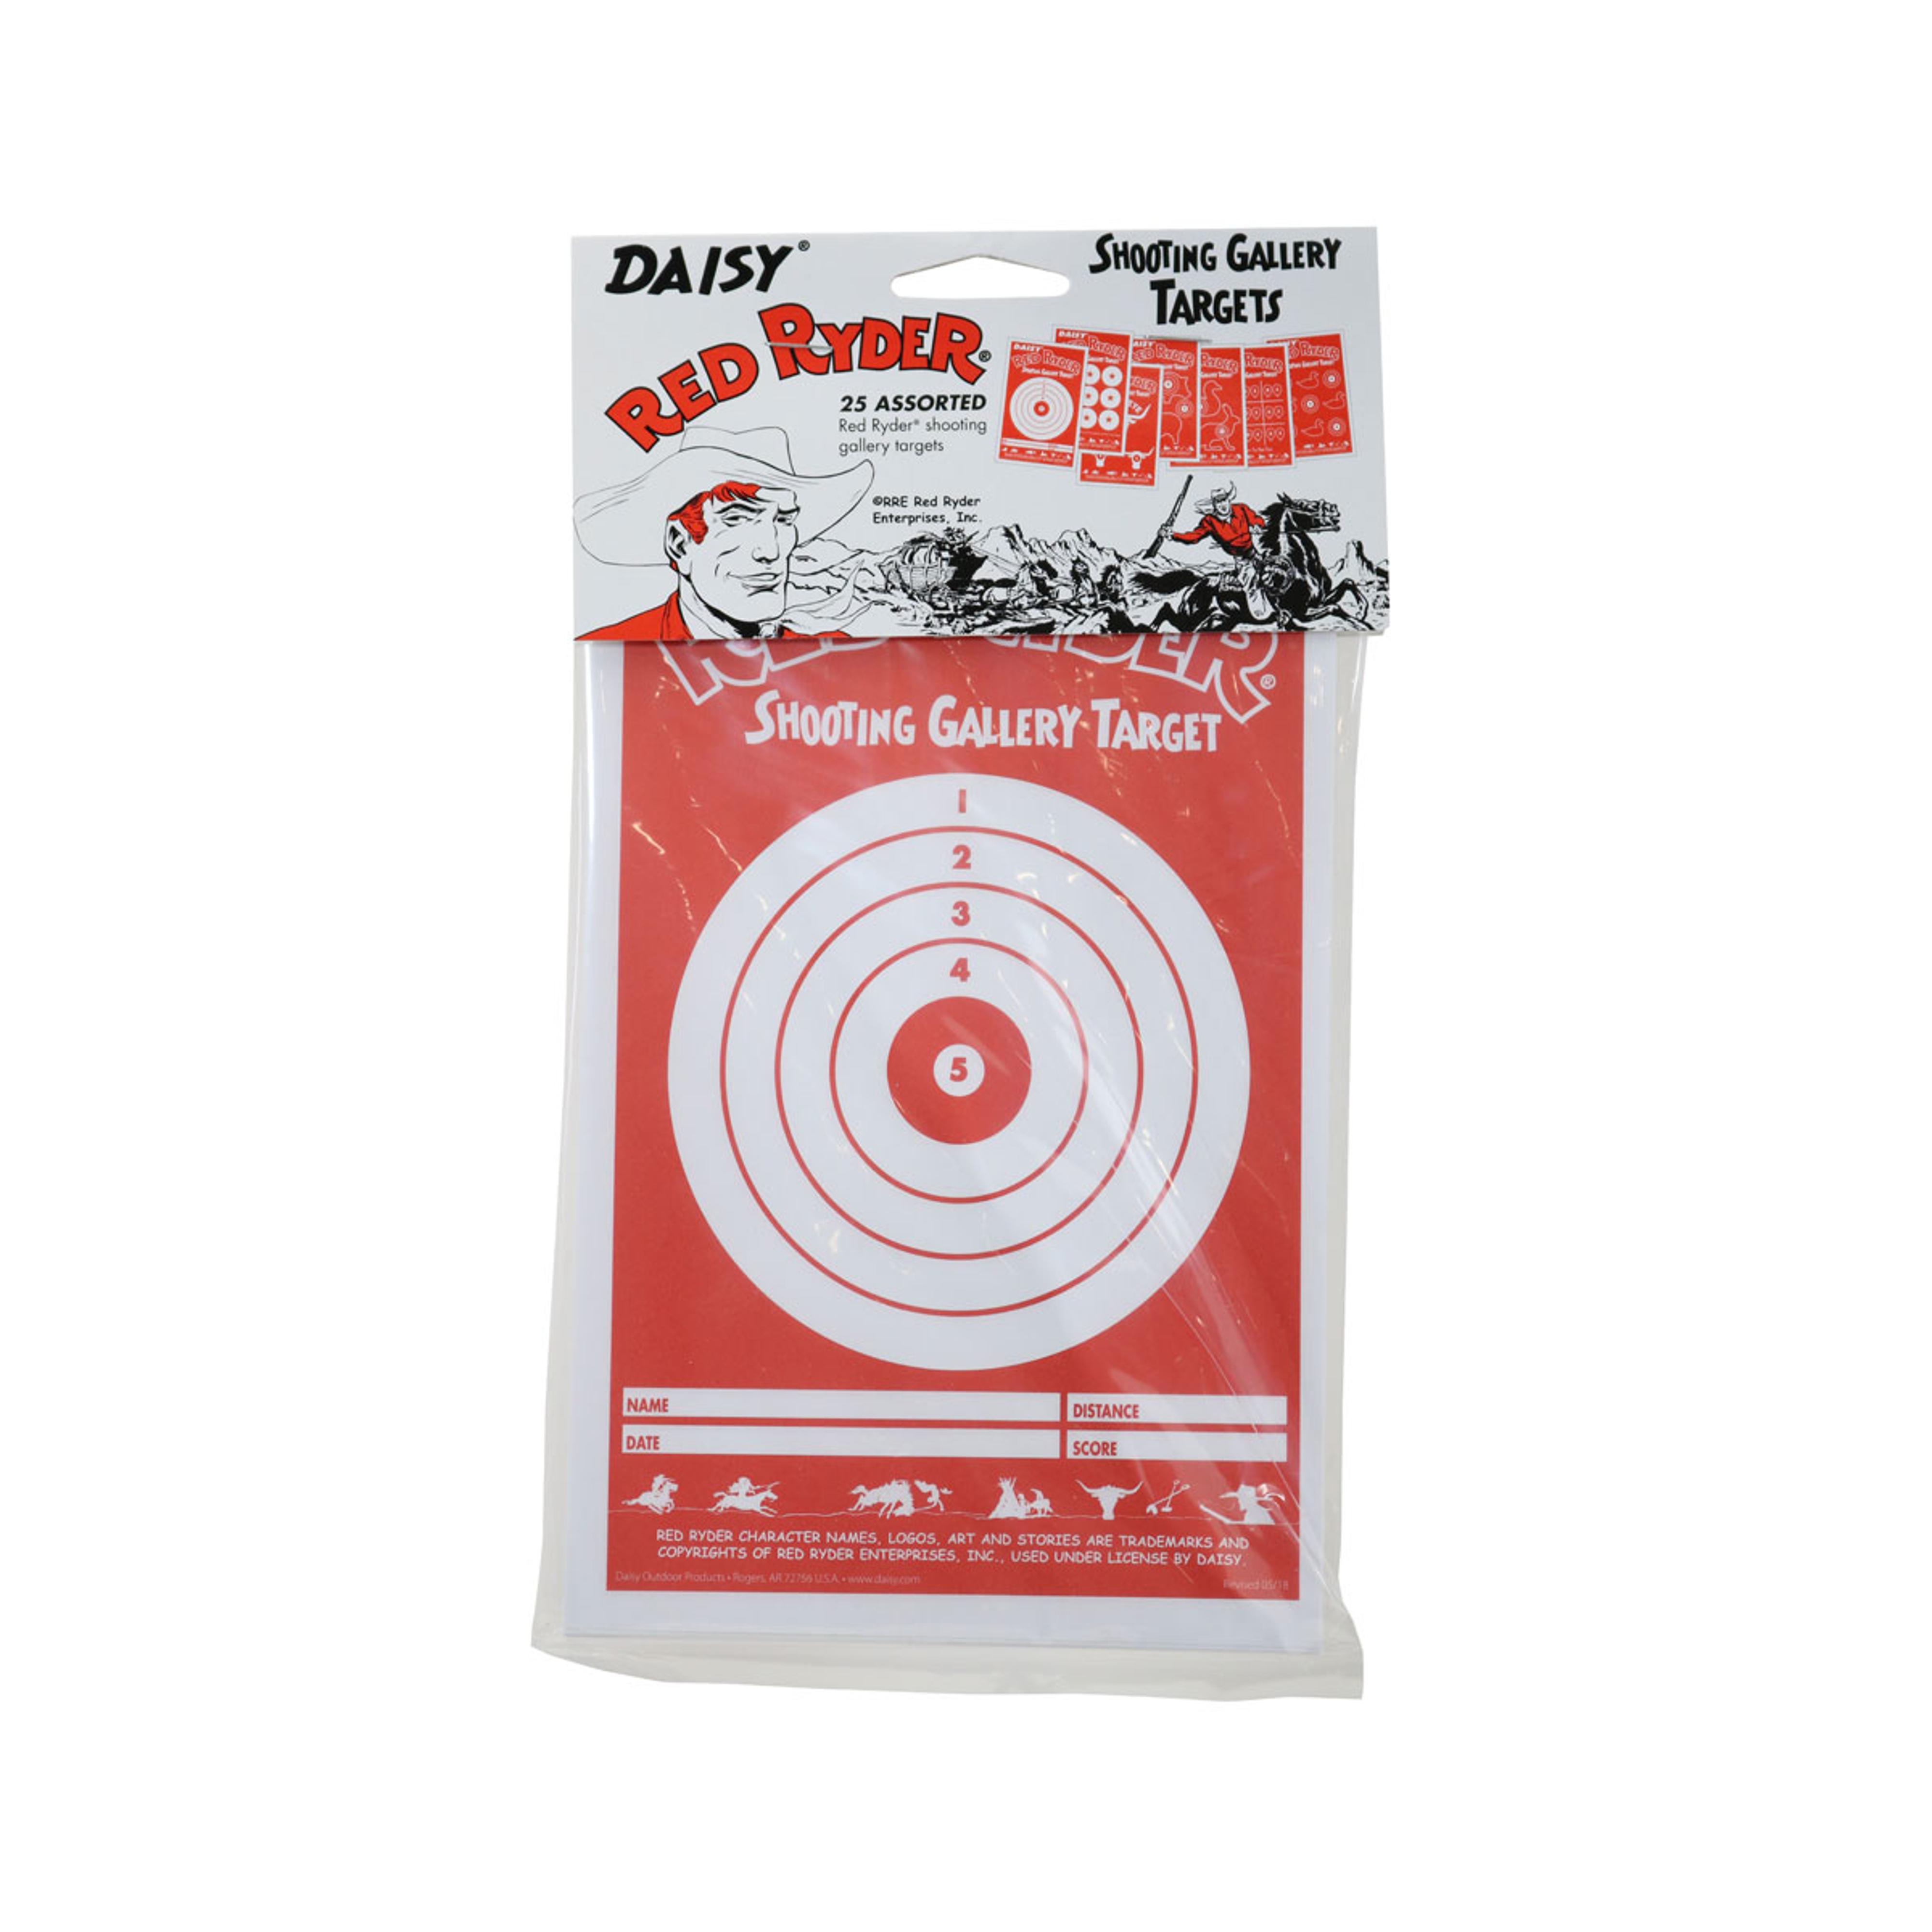  Daisy Red Ryder Paper Target